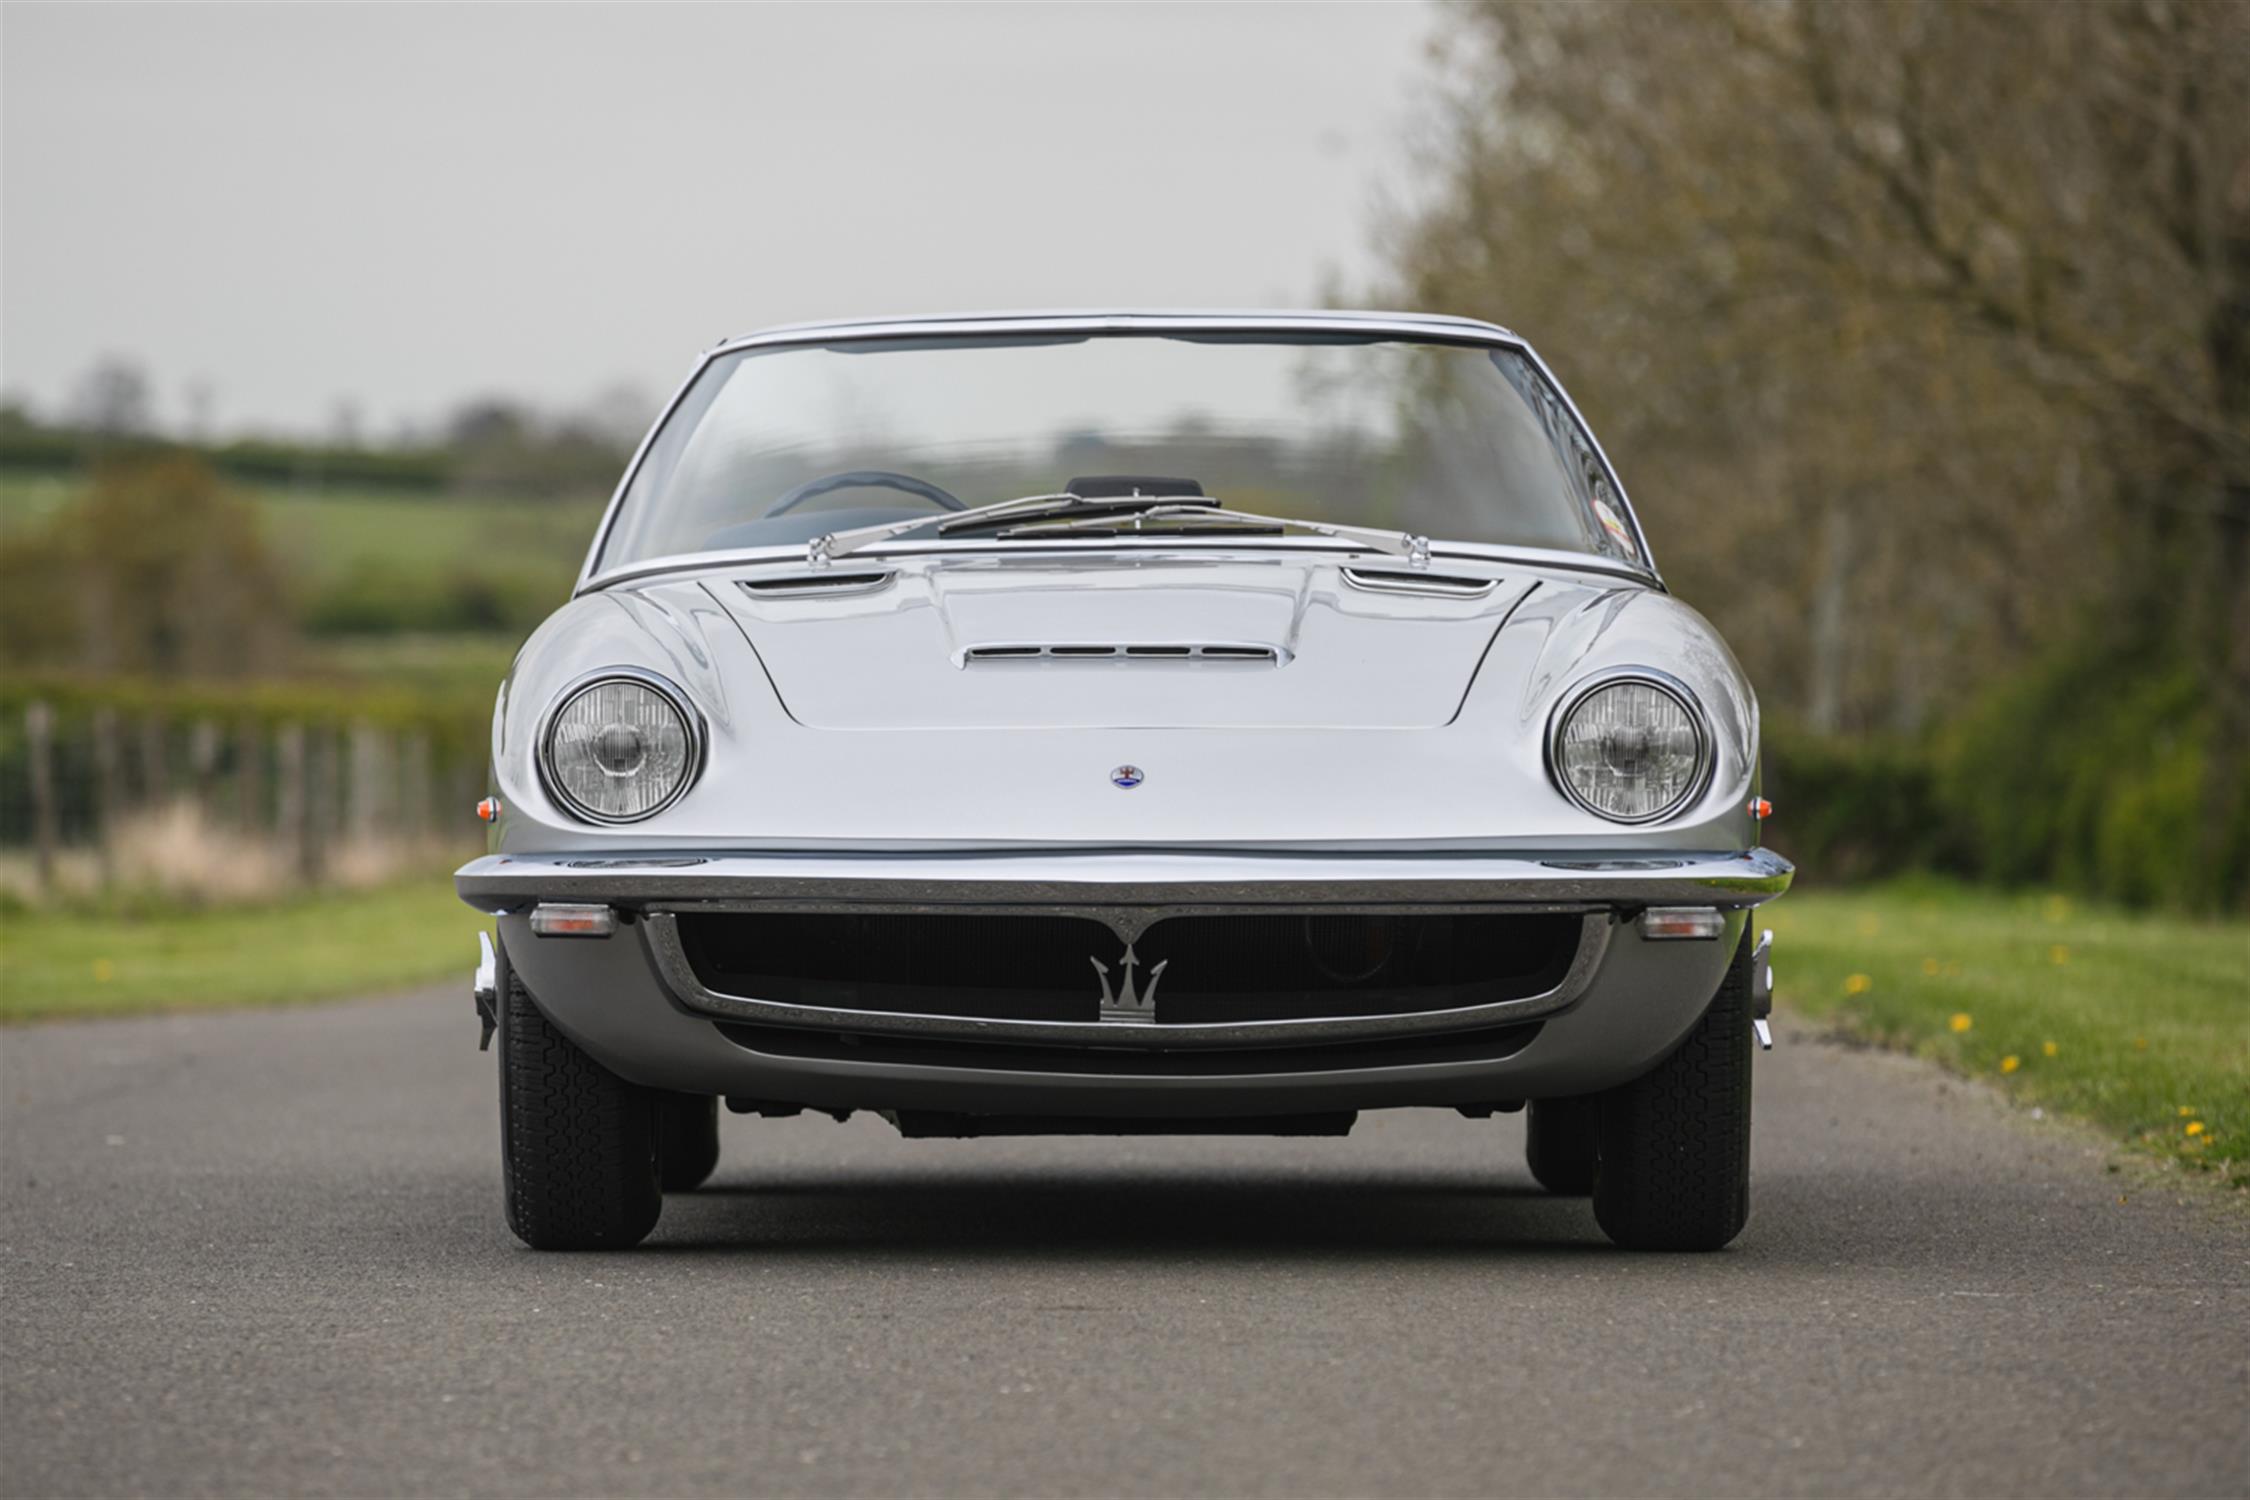 1964 Maserati Mistral 3700 Spyder. The 1964 Earls Court Motor Show car. - Image 7 of 10